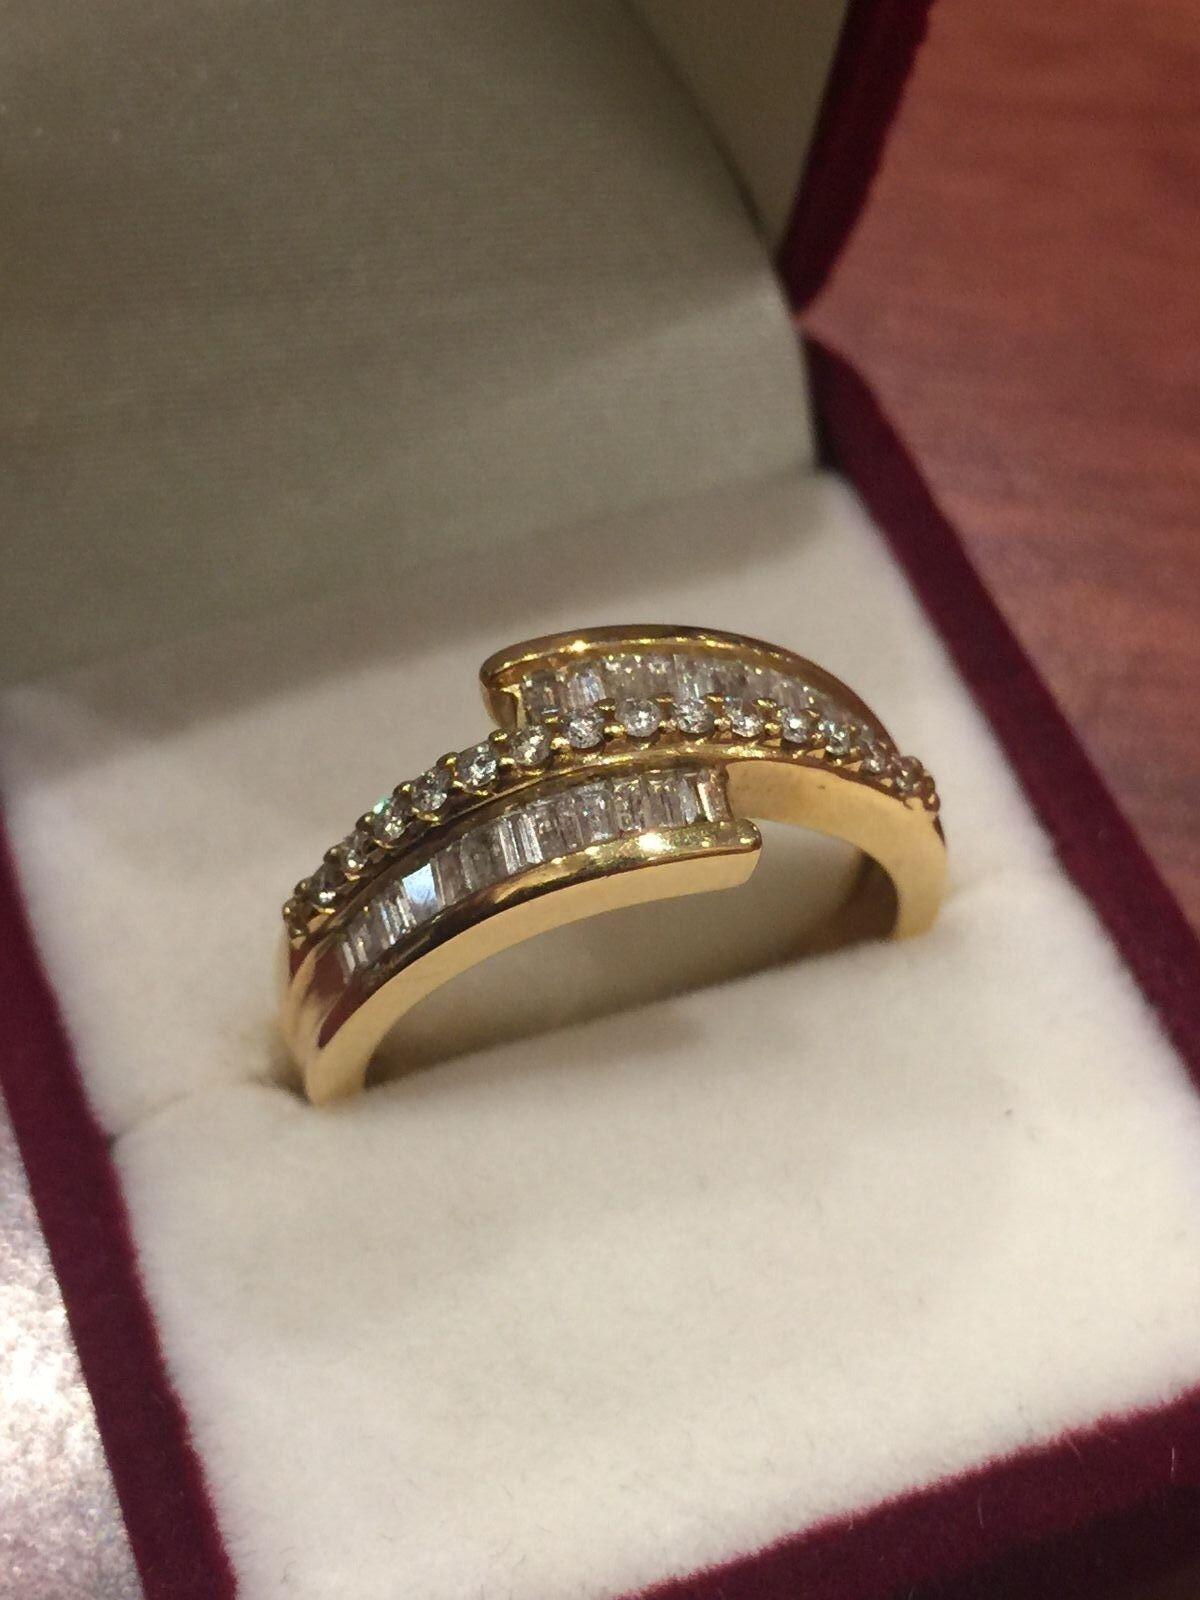 Retro Baguette Cut Diamond Dress Ring in 18K Yellow Gold. Diamonds' weight: 1.25ct. For Sale